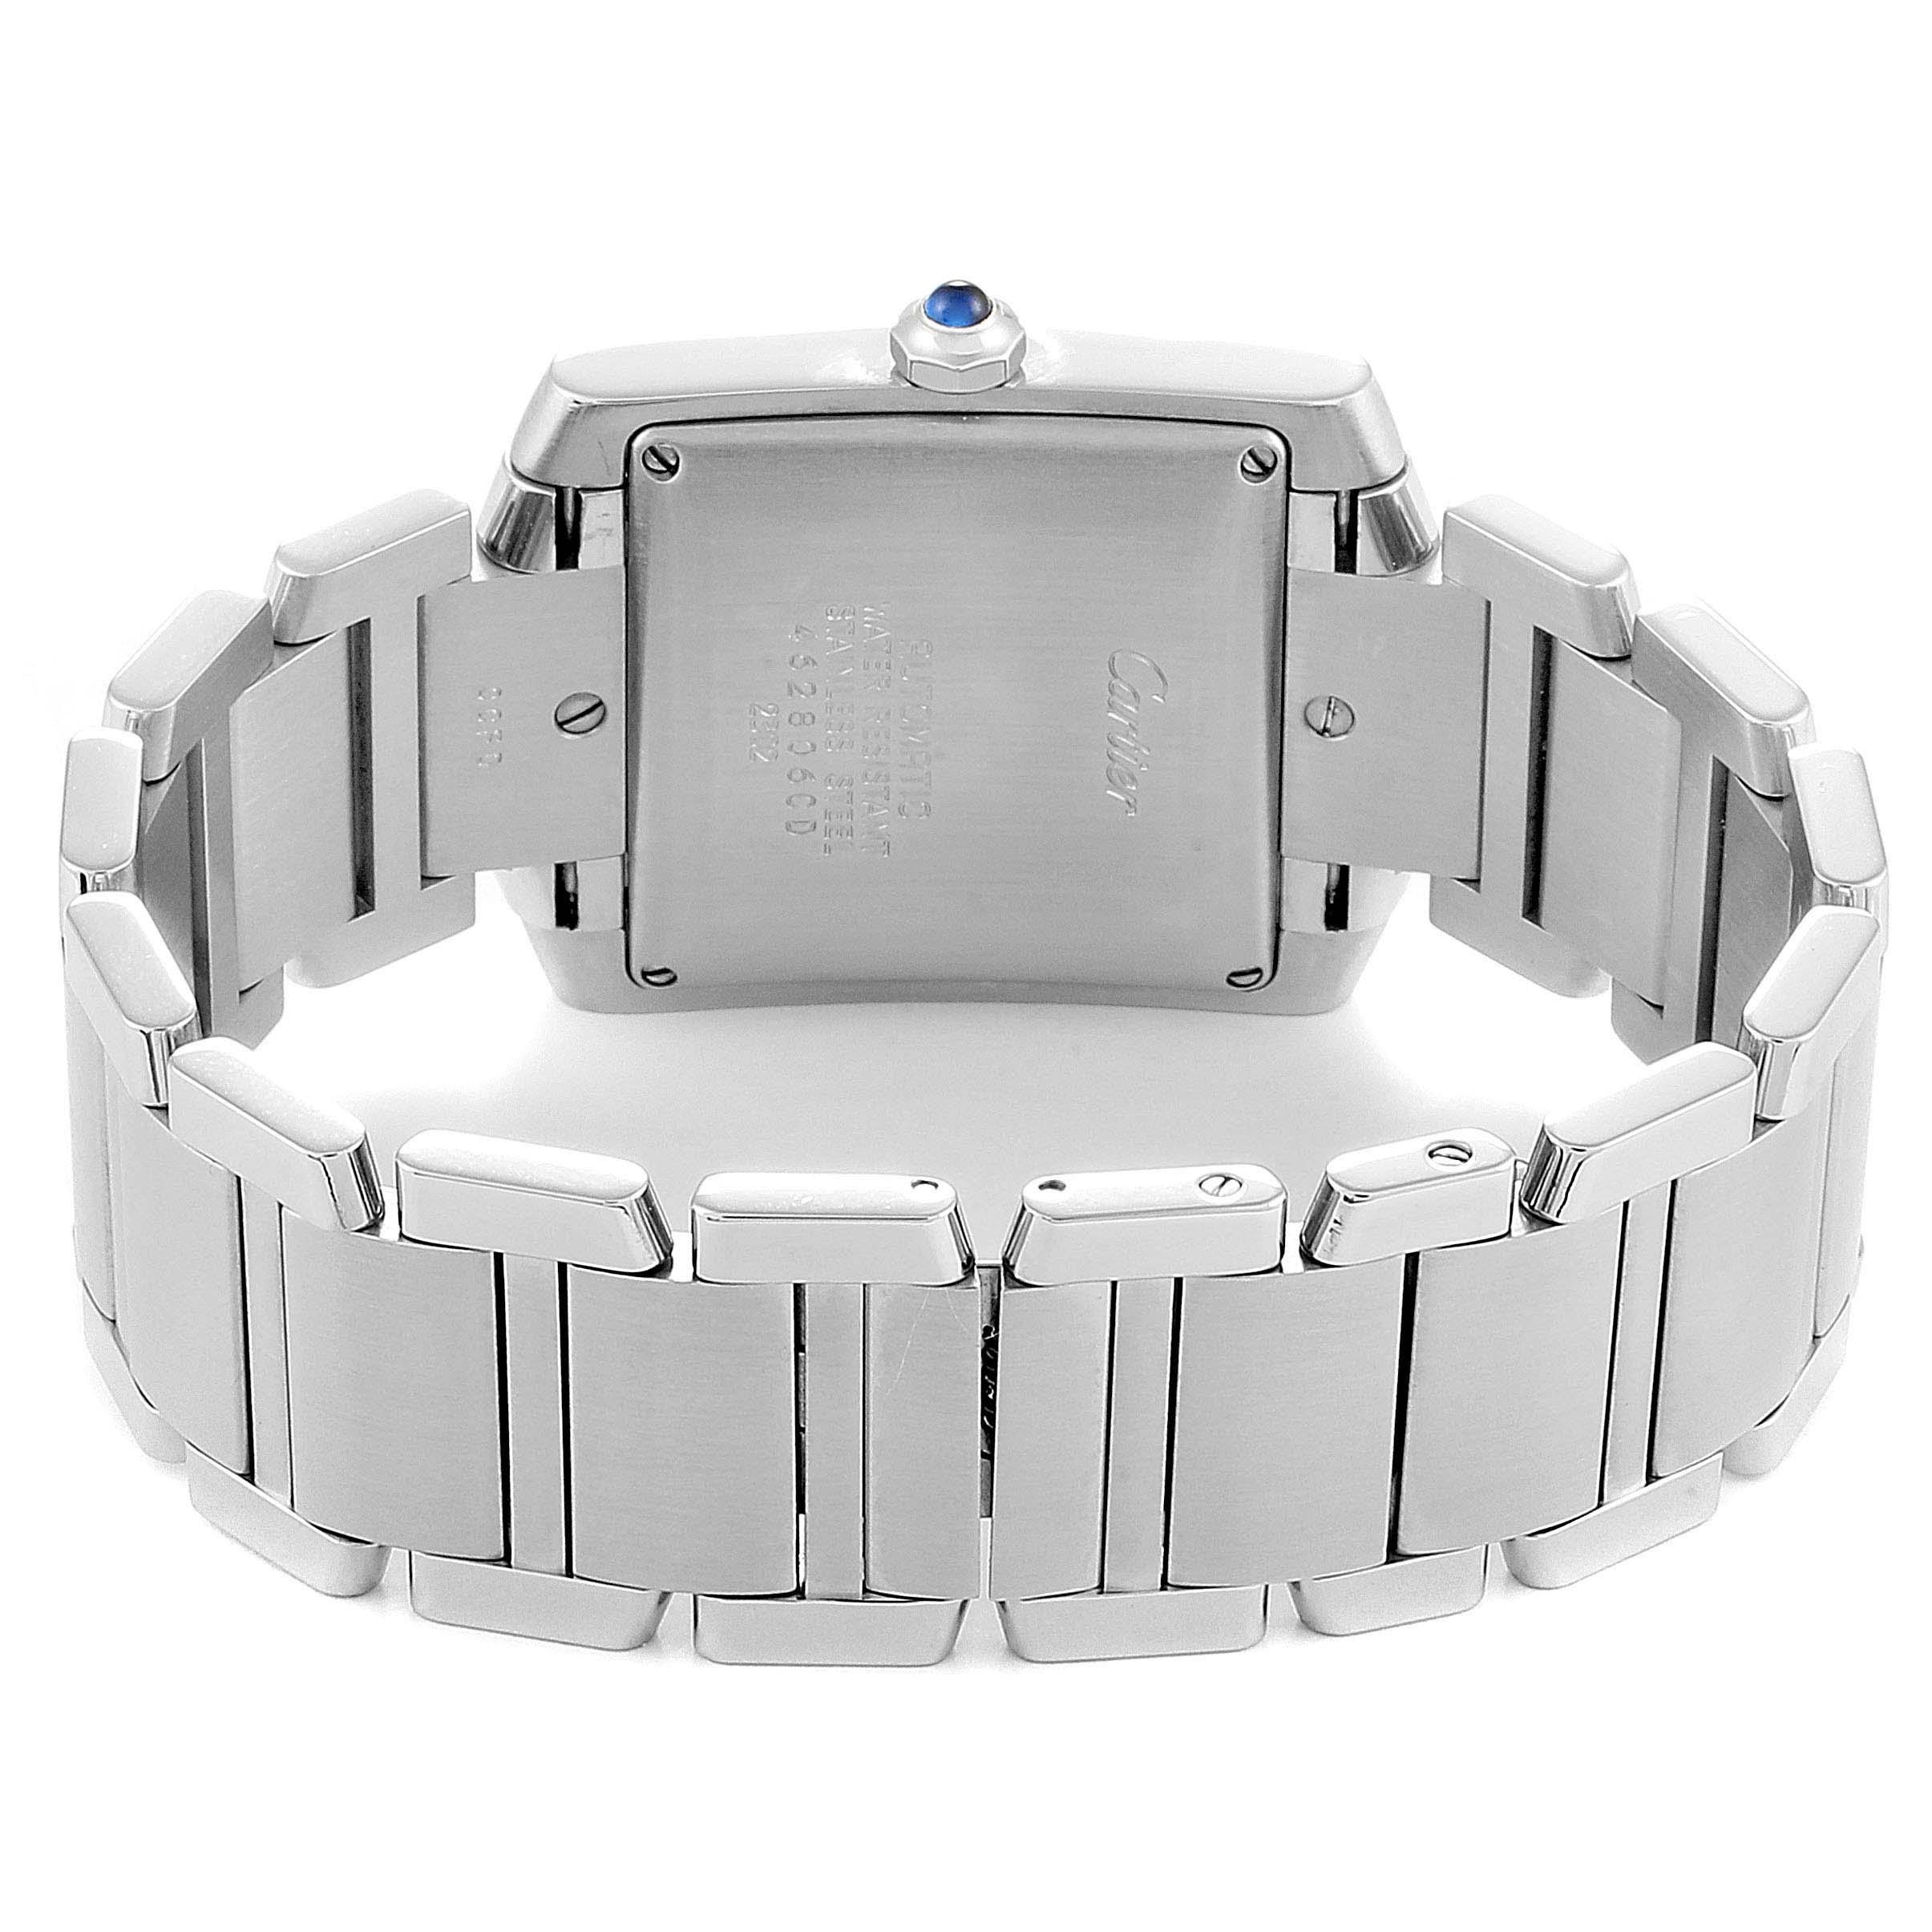 Cartier Tank Francaise Silver Dial Automatic Steel Men's Watch W51002Q3 For Sale 4